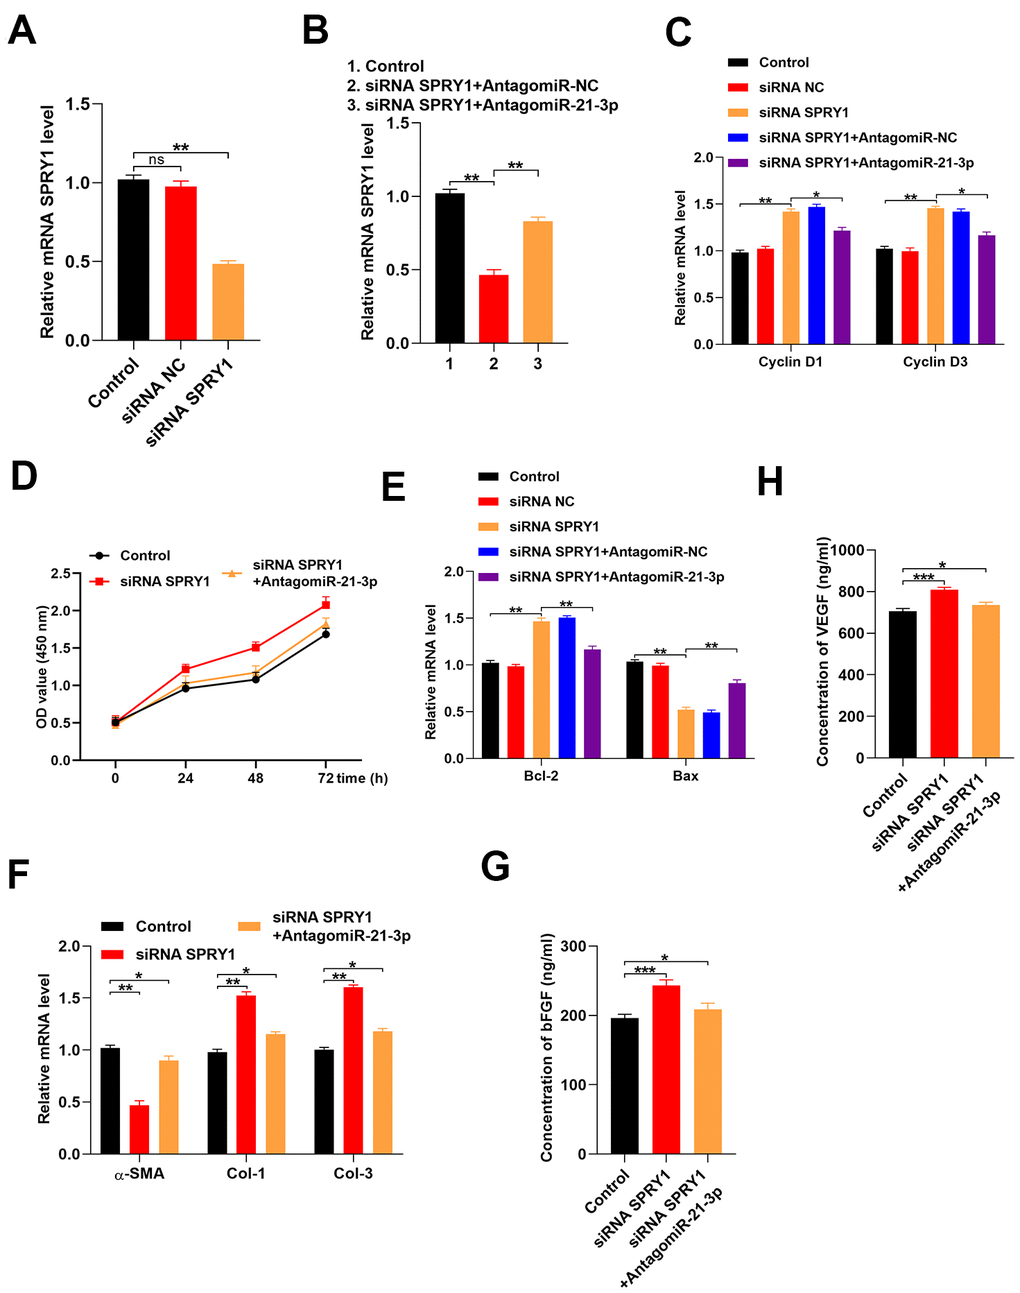 Reduction of SPRY1 enhances fibroblast function. (A, B) The level of mRNA SPRY1 in the different groups was measured by qRT-PCR; (C) The levels of cyclin D1 and cyclin D3 mRNA in the different groups were measured by qRT-PCR; (D) CCK-8 assay detected the proliferative ability of fibroblasts in the different groups; (E) The levels of Bcl-2 and Bax mRNA in the different groups were measured by qRT-PCR; (F) The levels of α-SMA, Col 1, and Col 3 mRNA in the different groups were measured by qRT-PCR; (G, H) The concentrations of bFGF and VEGF were measured by ELISA. Data are presented as the mean ± SD from three independent experiments. *p 